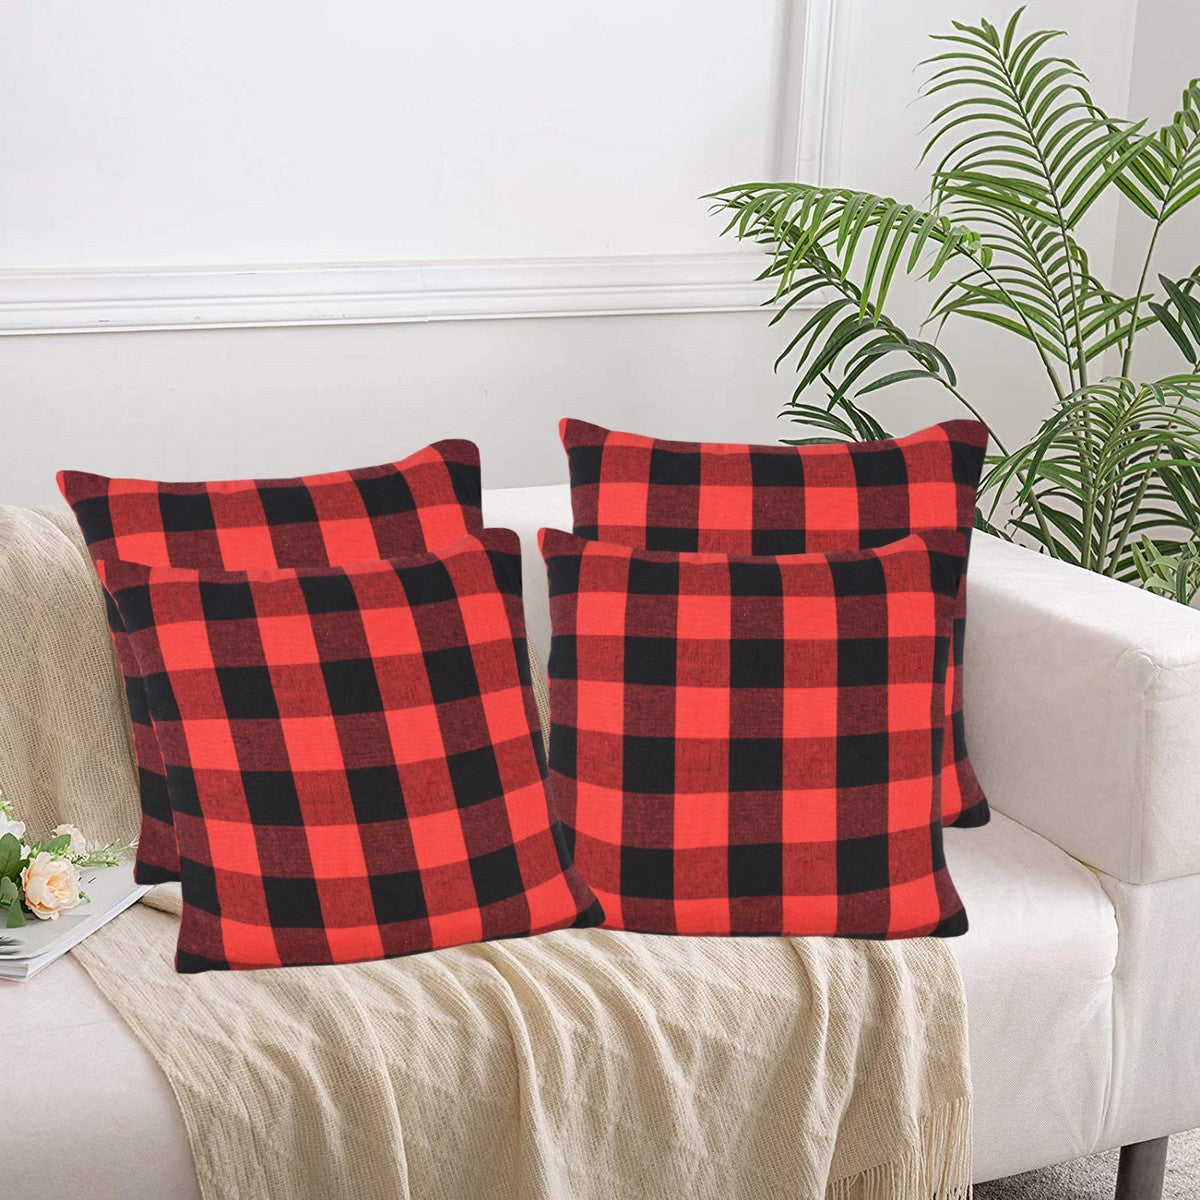 Lushomes Square Cushion Cover, Cotton Sofa Pillow Cover set of 4, 18x18 Inch, Big Checks, Red and Black Checks, Pillow Cushions Covers (Pack of 4, 45x45 Cms)